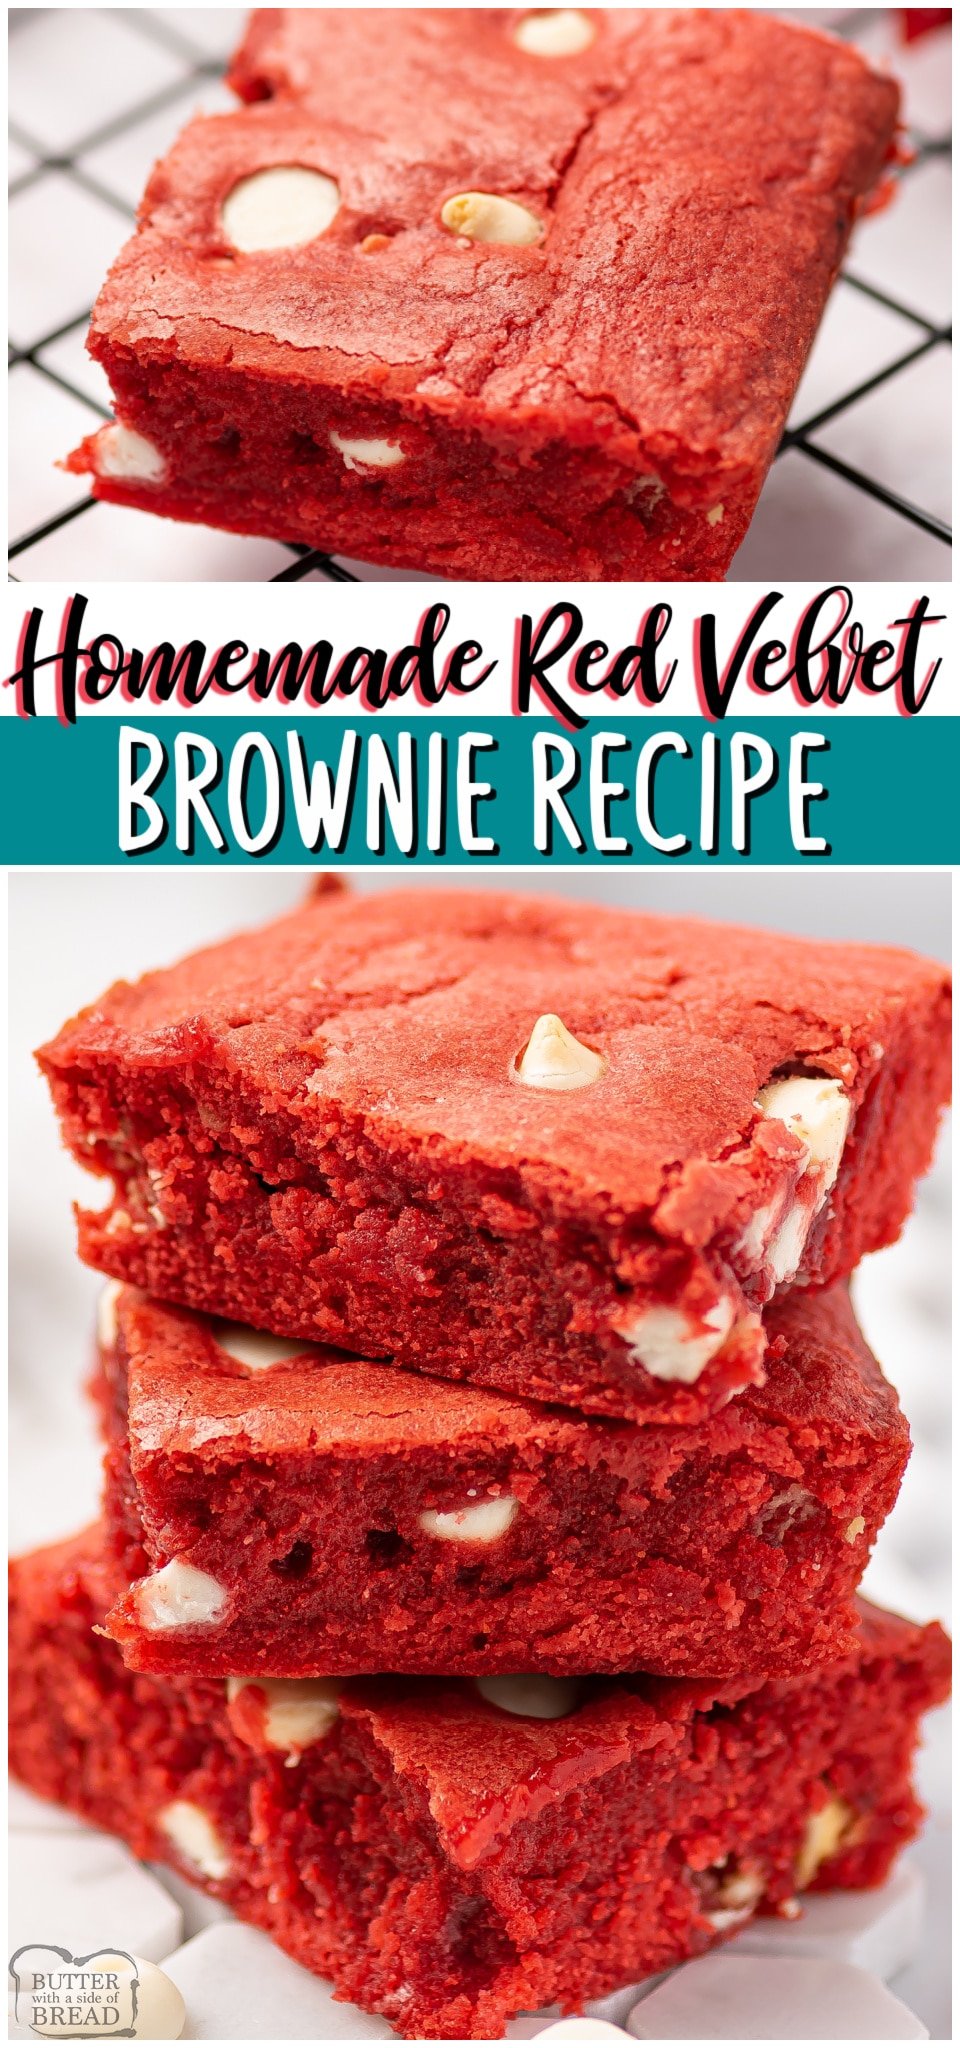 Red velvet brownies are a rich, chocolaty brownie with red velvet color, scattered with chocolate chips. Homemade Red Velvet Brownies perfect for Valentine's day!